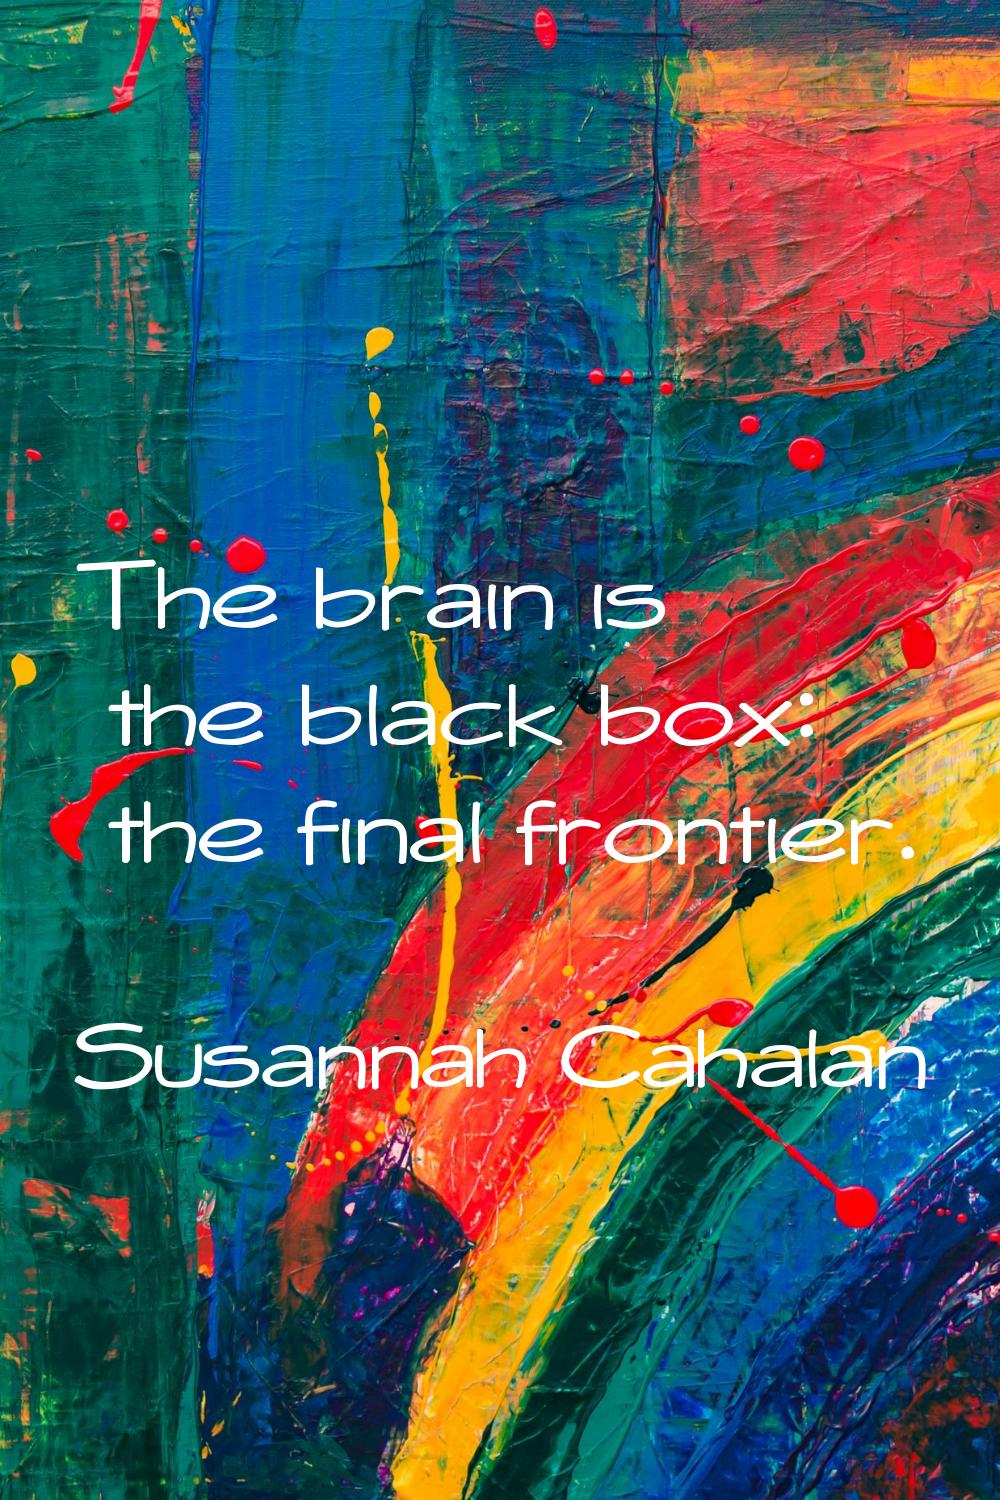 The brain is the black box: the final frontier.